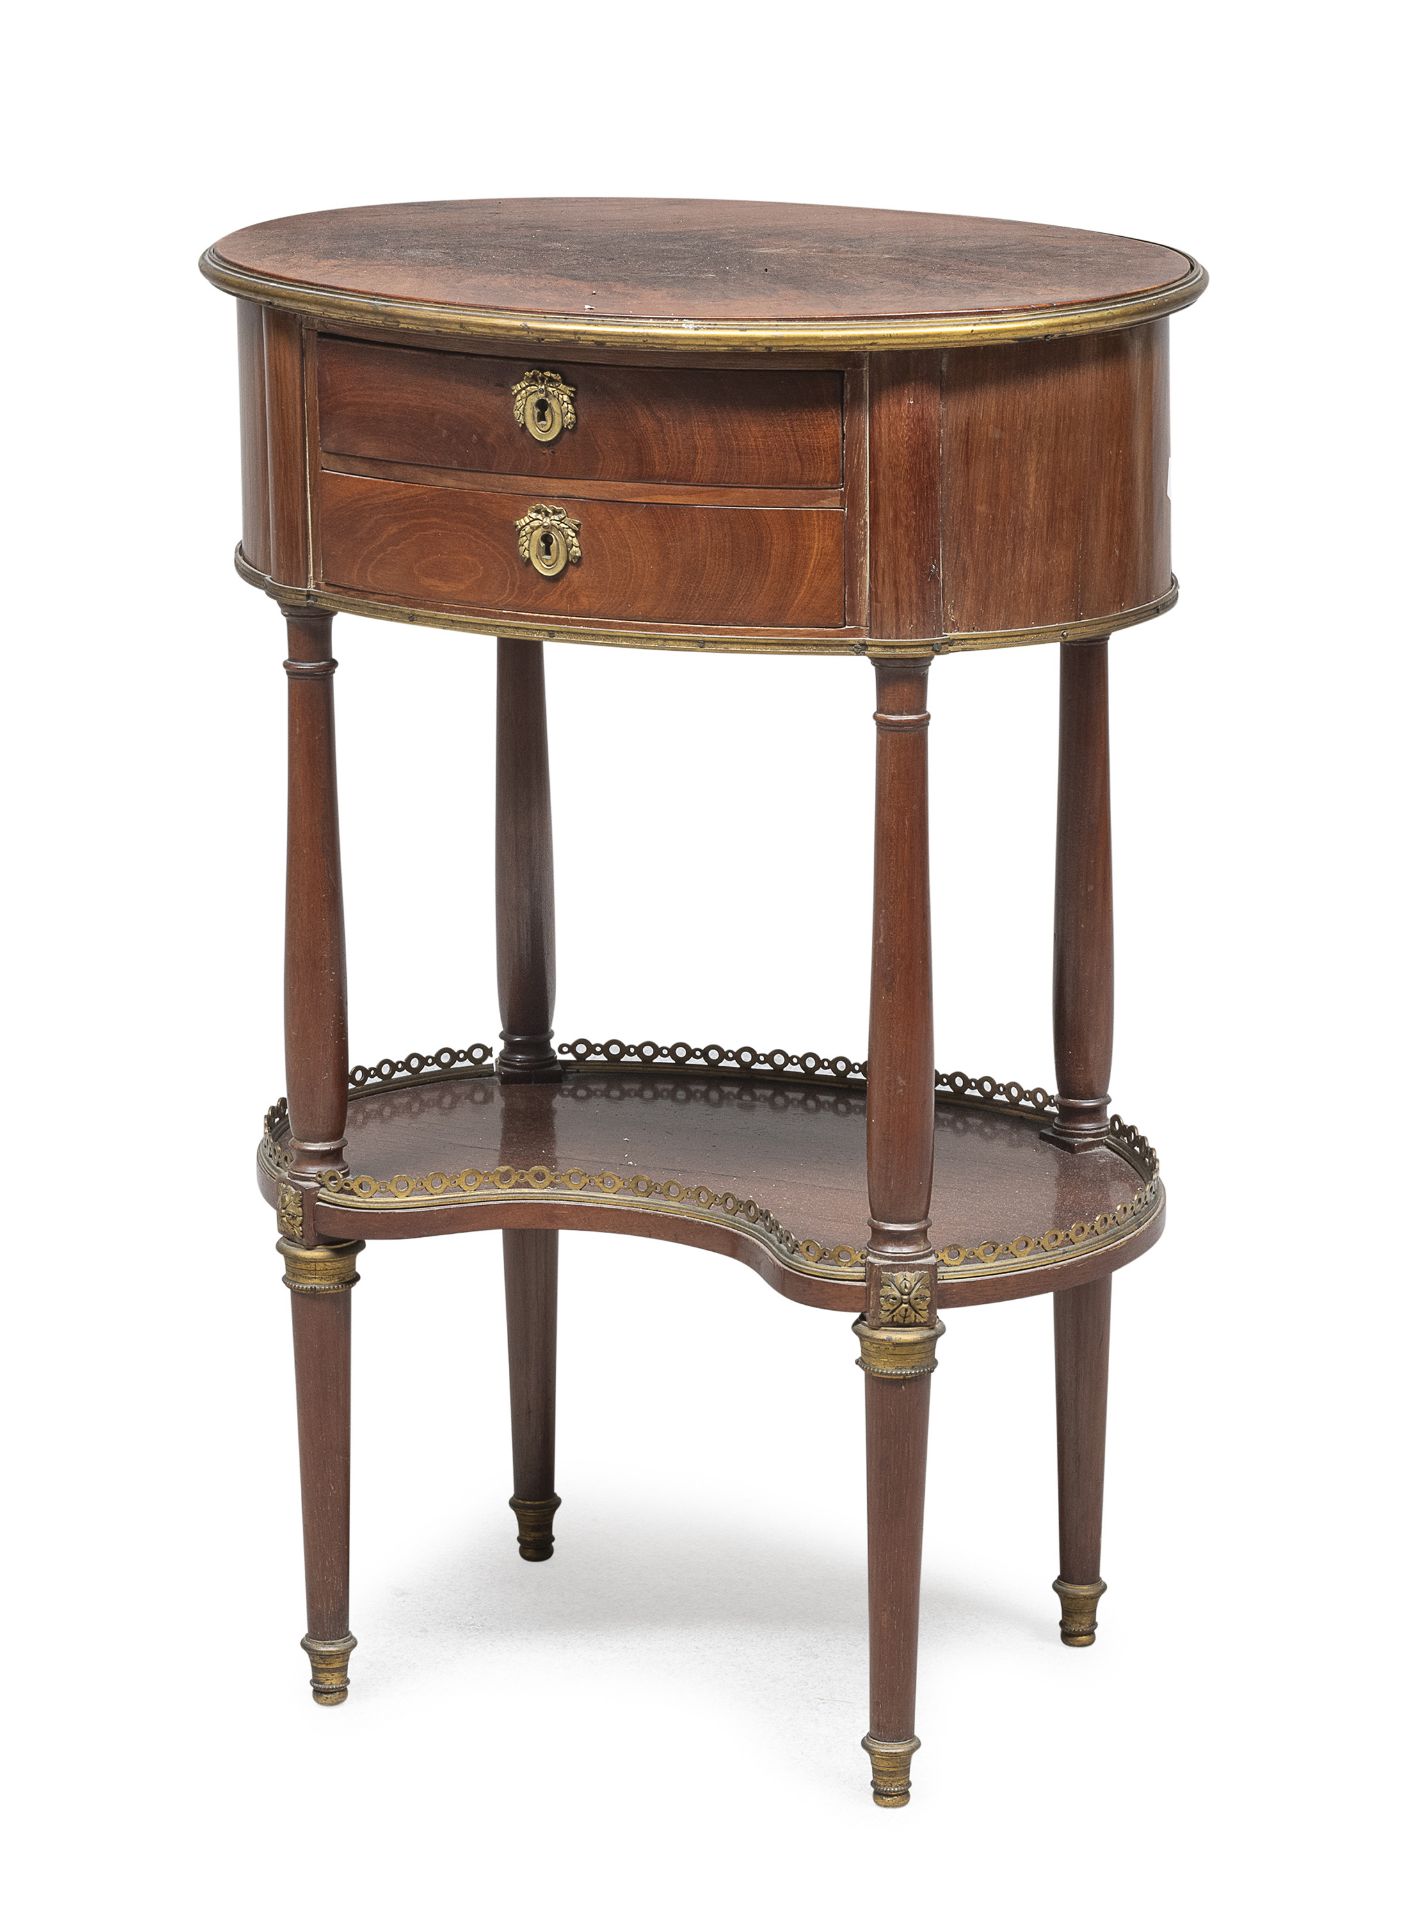 MAHOGANY BEDSIDE TABLE, FRANCE LATE LOUIS XVI PERIOD